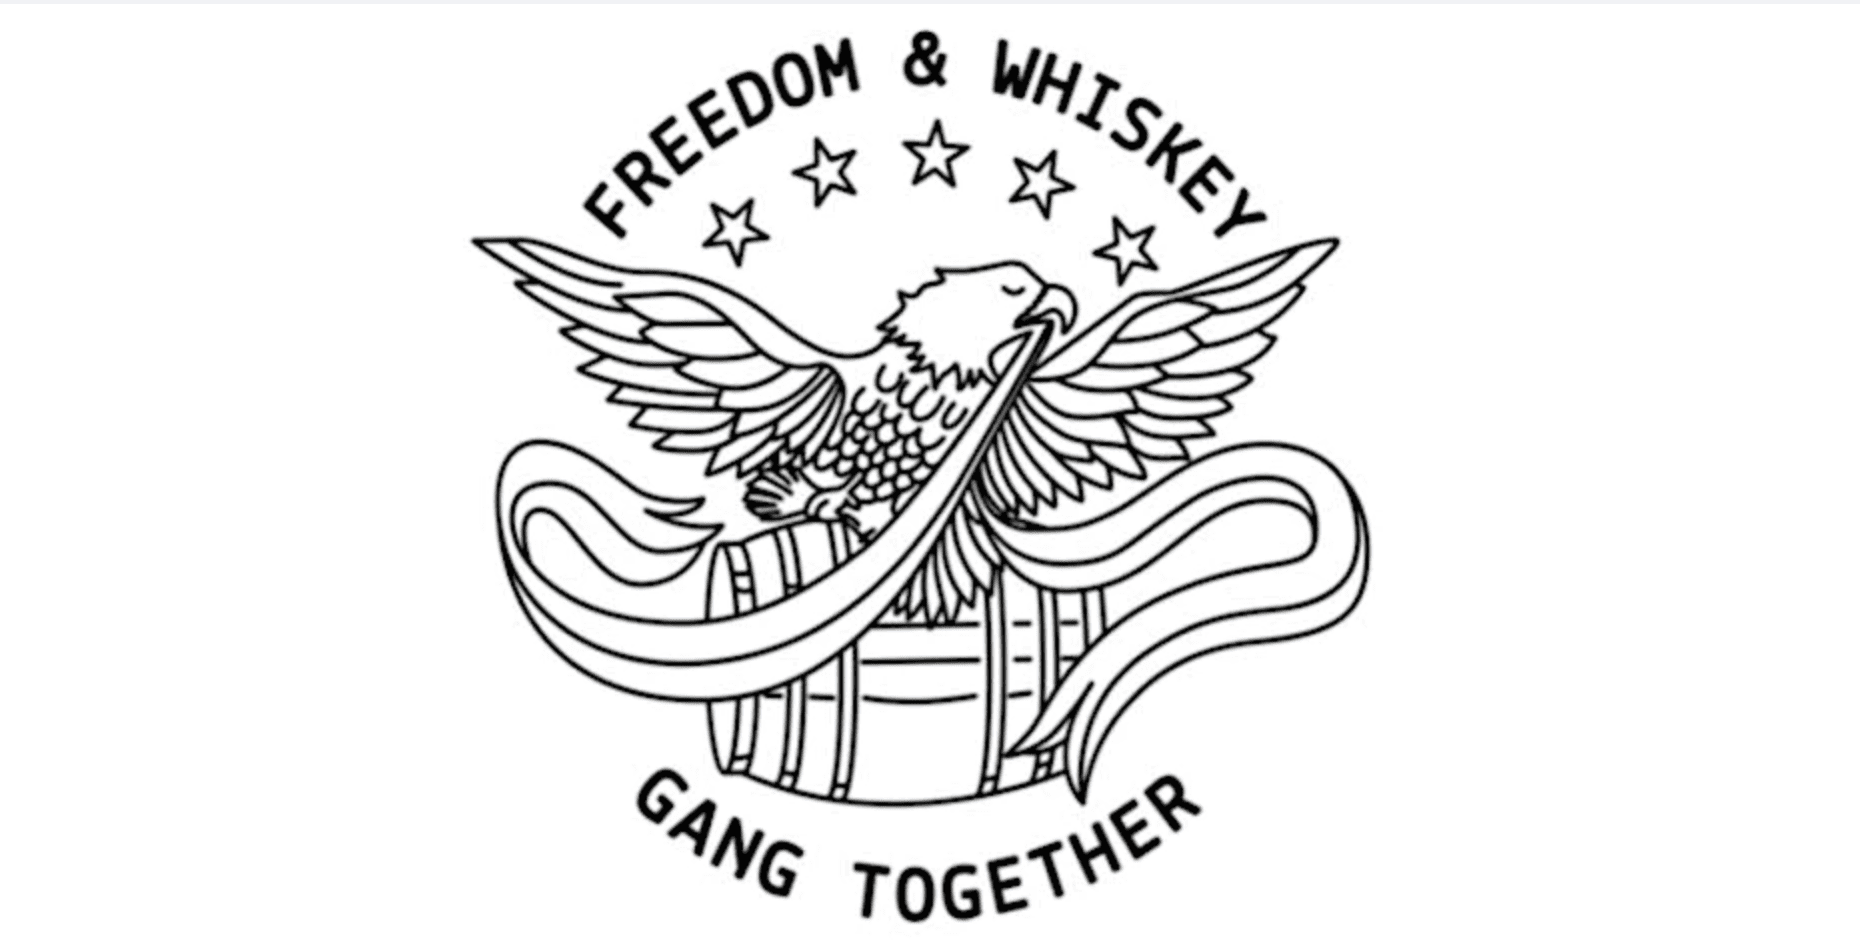 Freedom and Whiskey event in Franklin, TN.